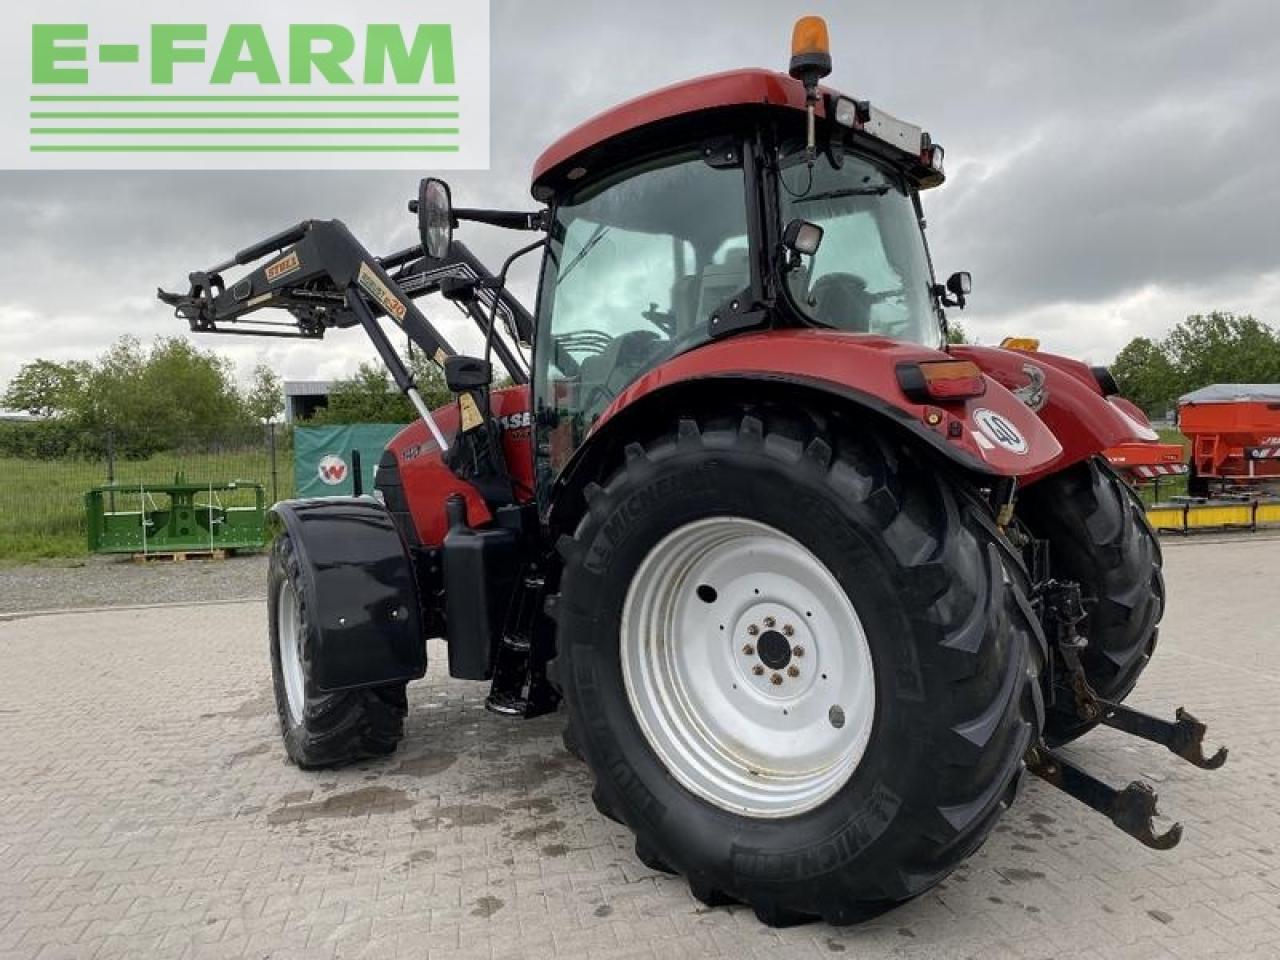 Tractor agricol Case-IH maxxum 140 multicontroller mit stoll frontlader hdp30: Foto 4